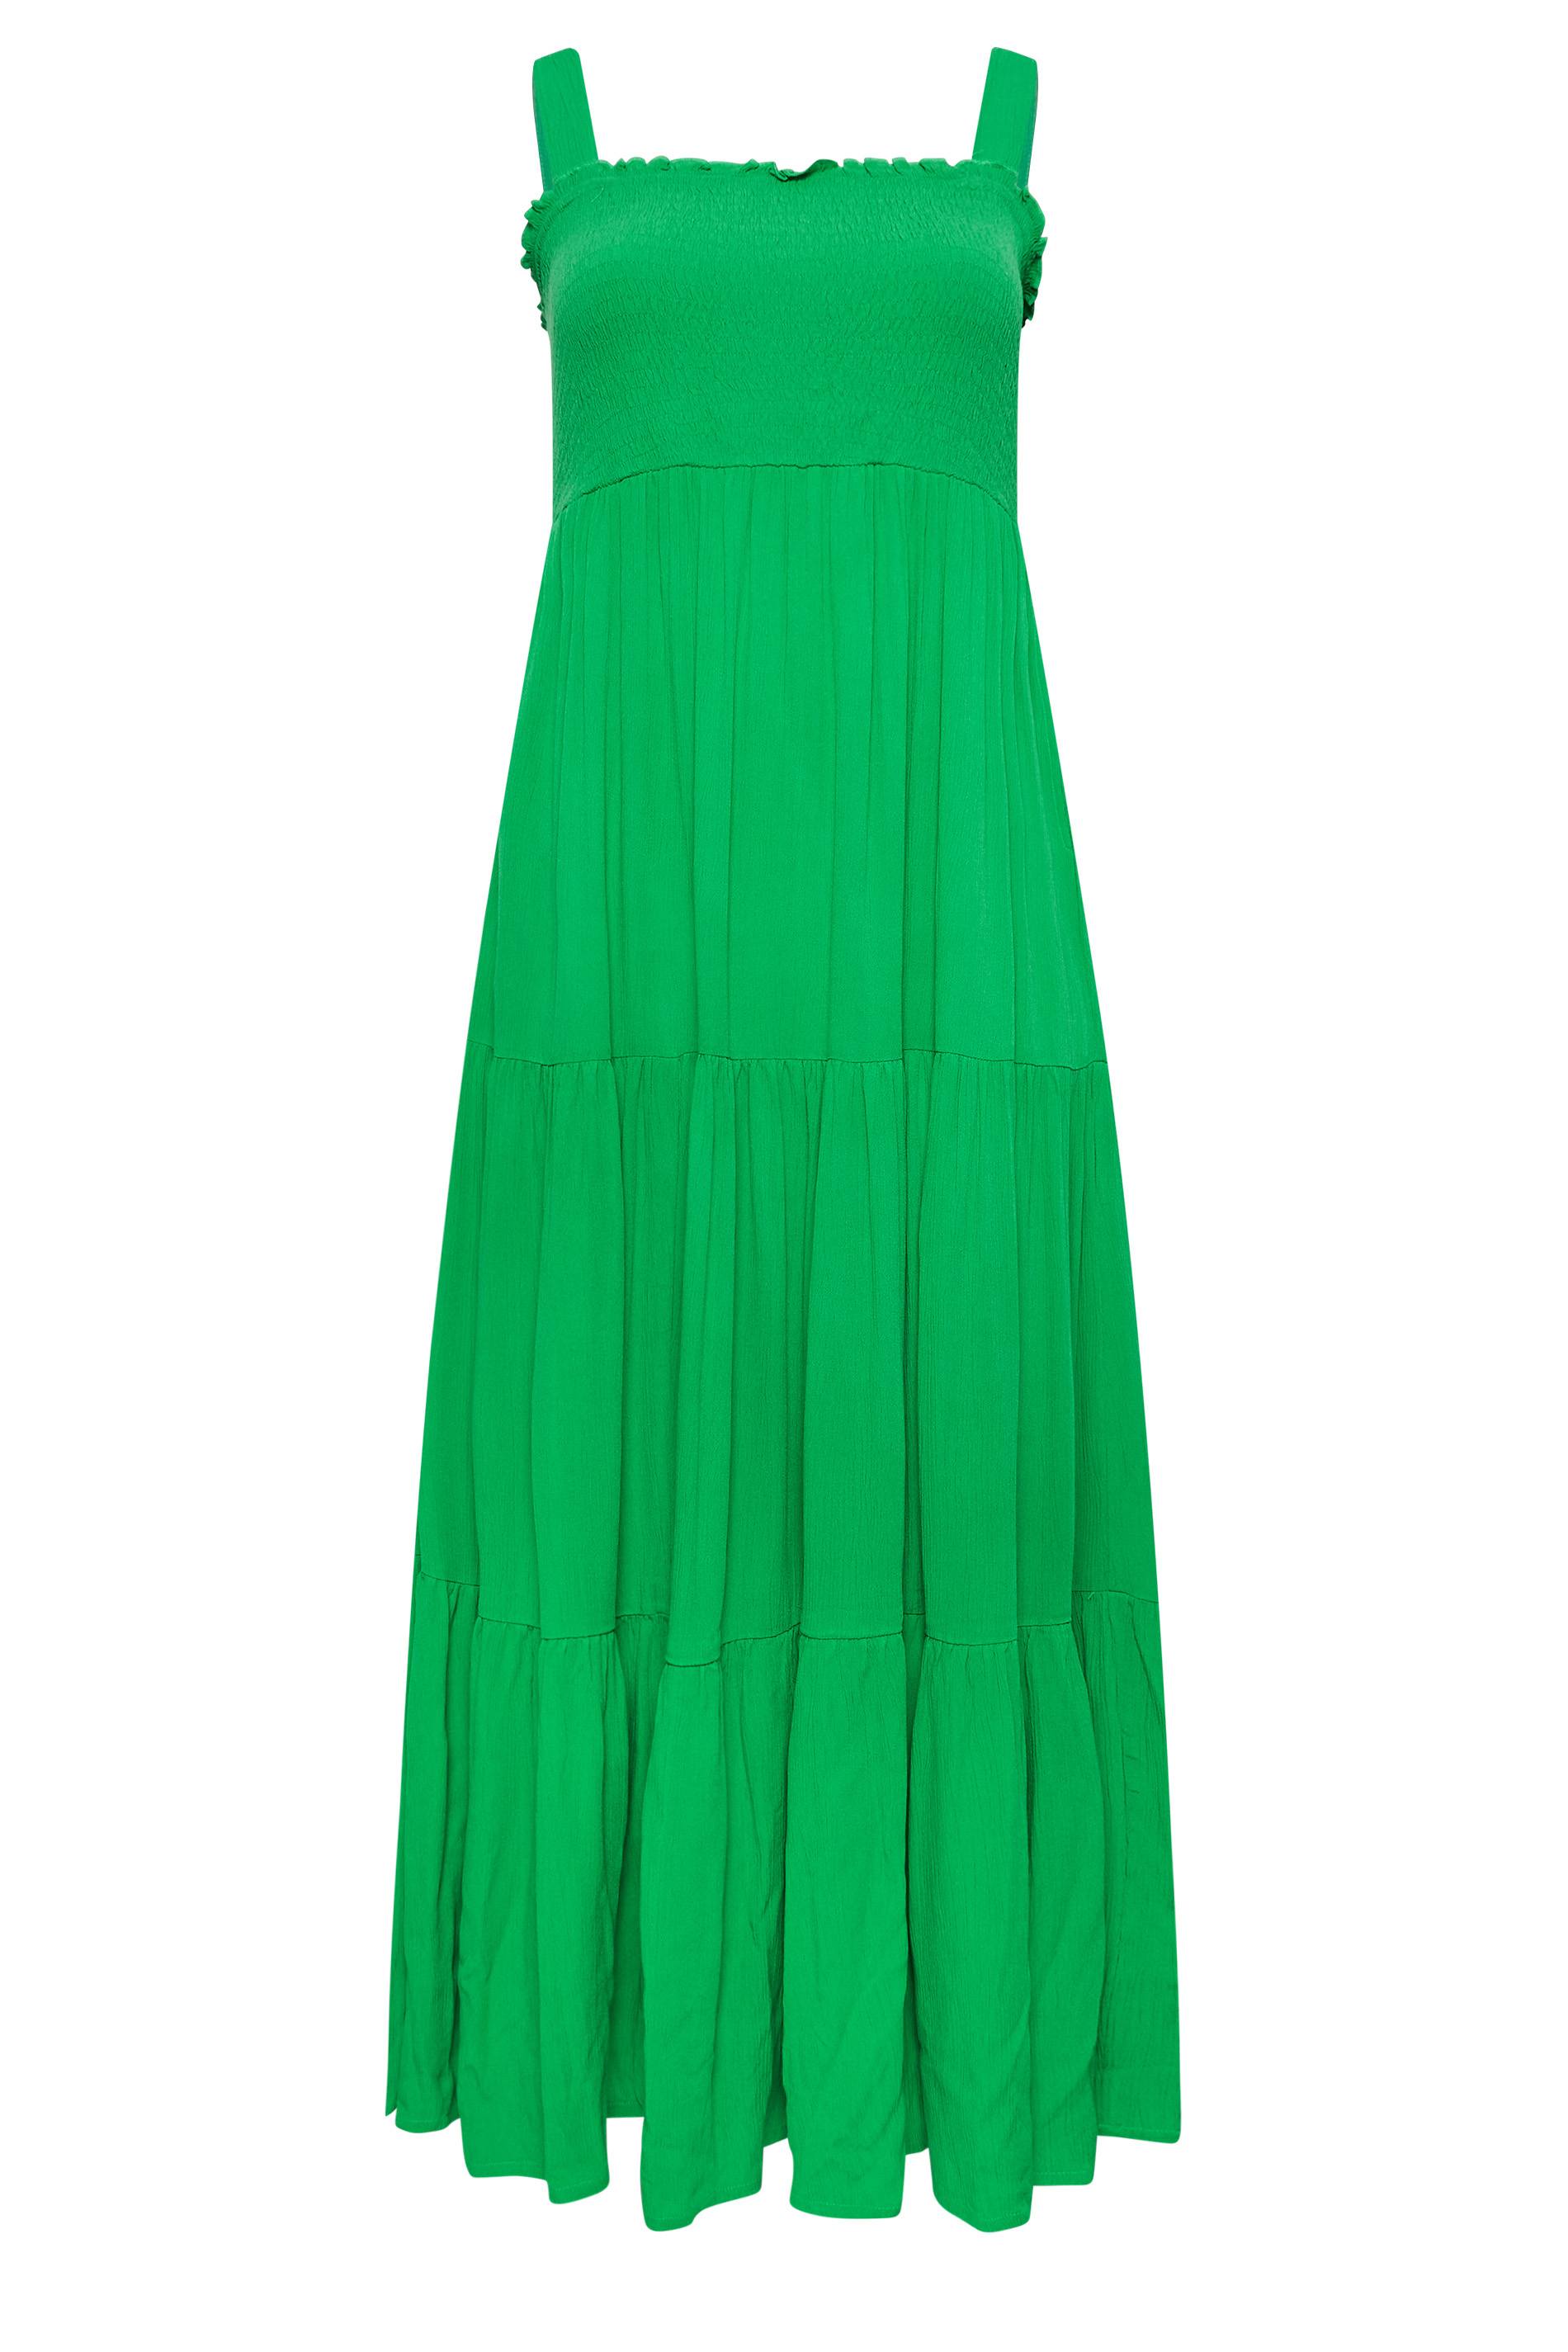 YOURS Plus Size Green Shirred Strappy Sundress | Yours Clothing